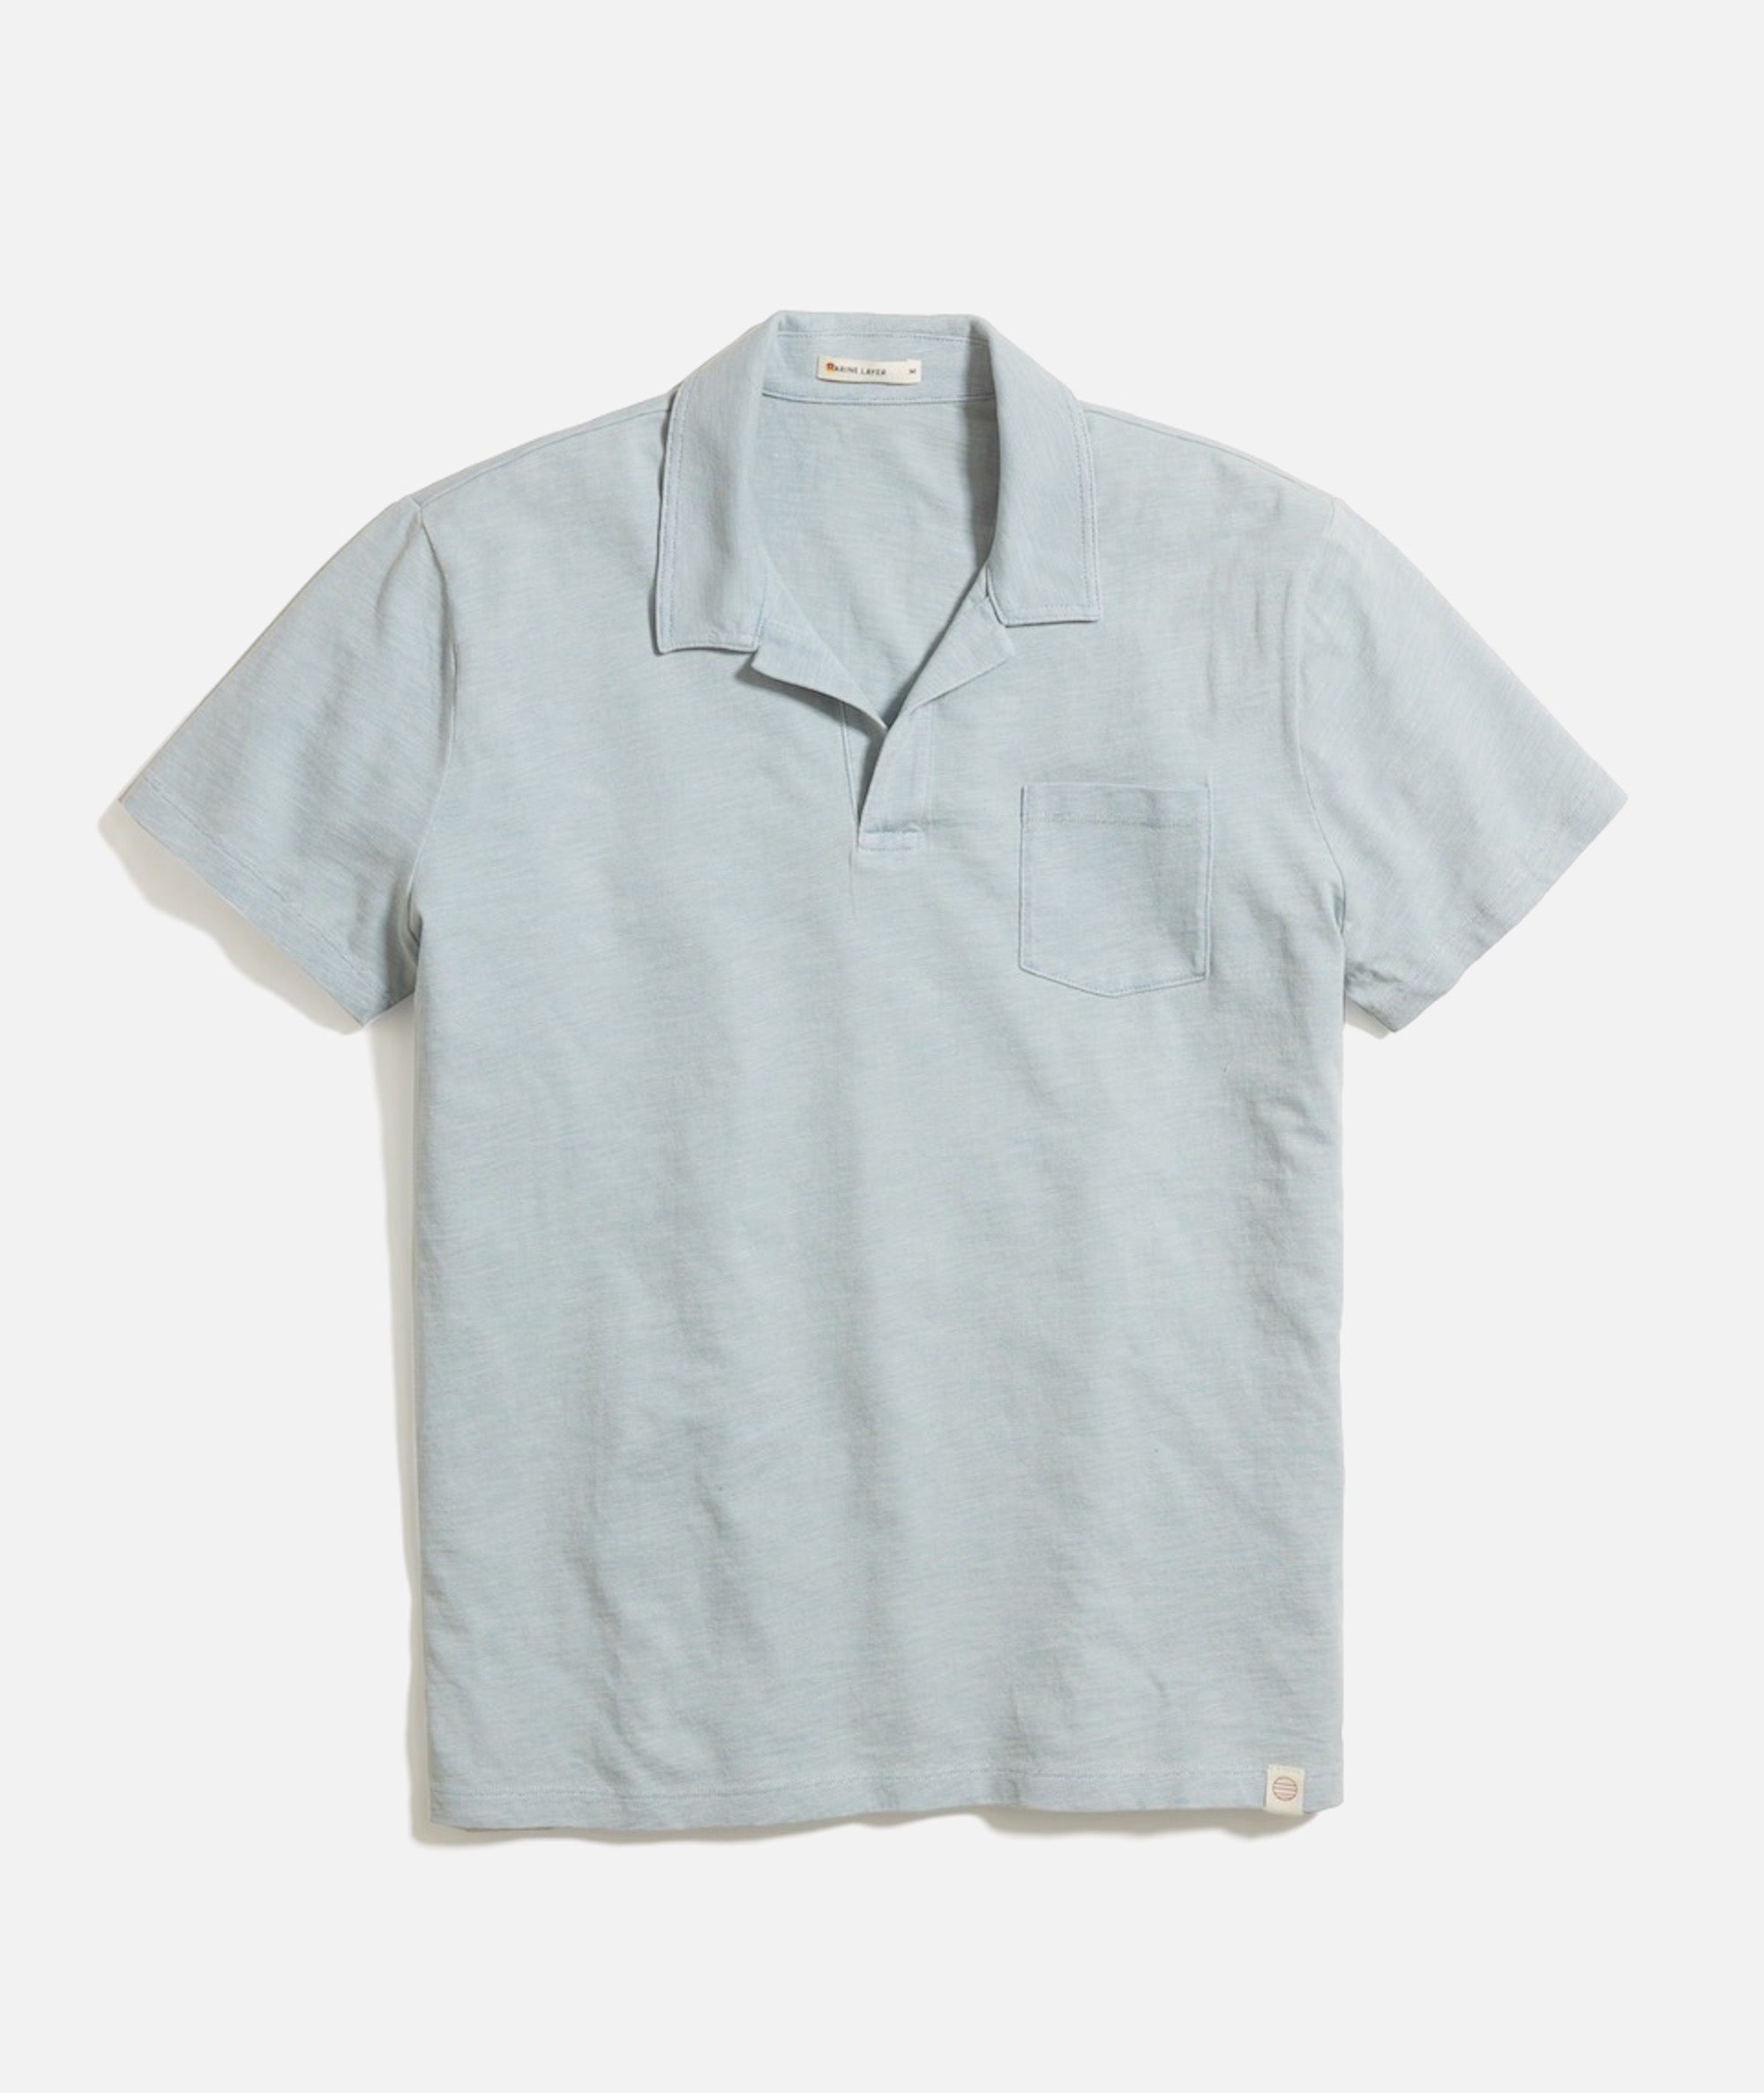 Blue Cotton – Heather China Cool in Marine Pique Polo Layer